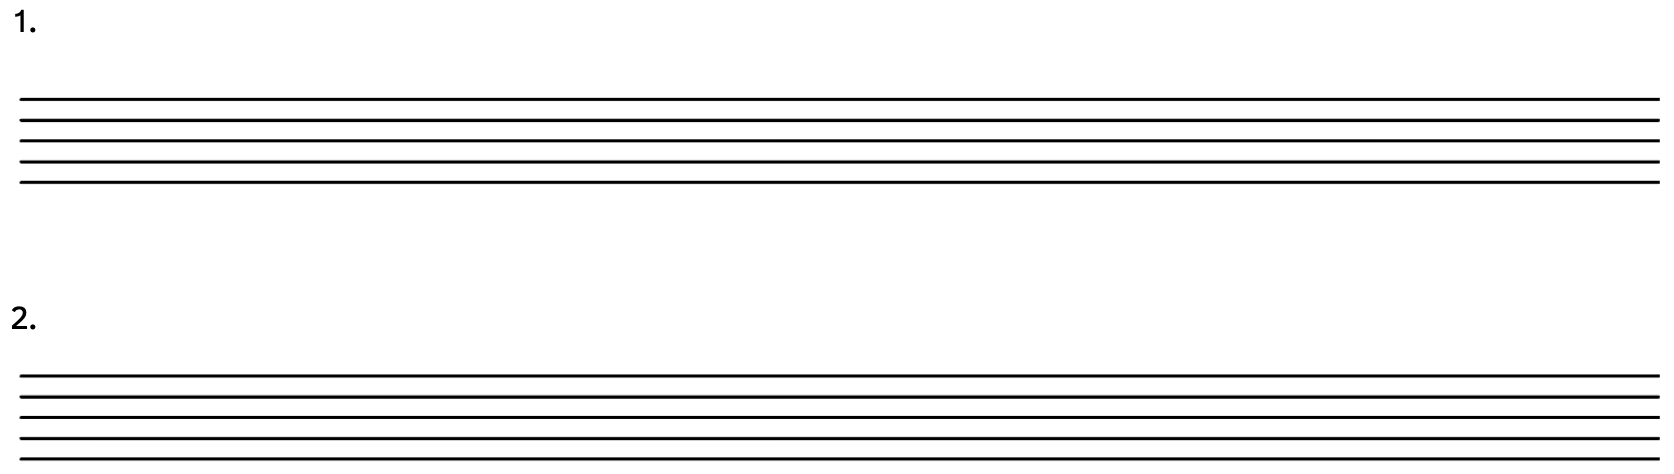 Two blank single-line staves are given to write your scales on.